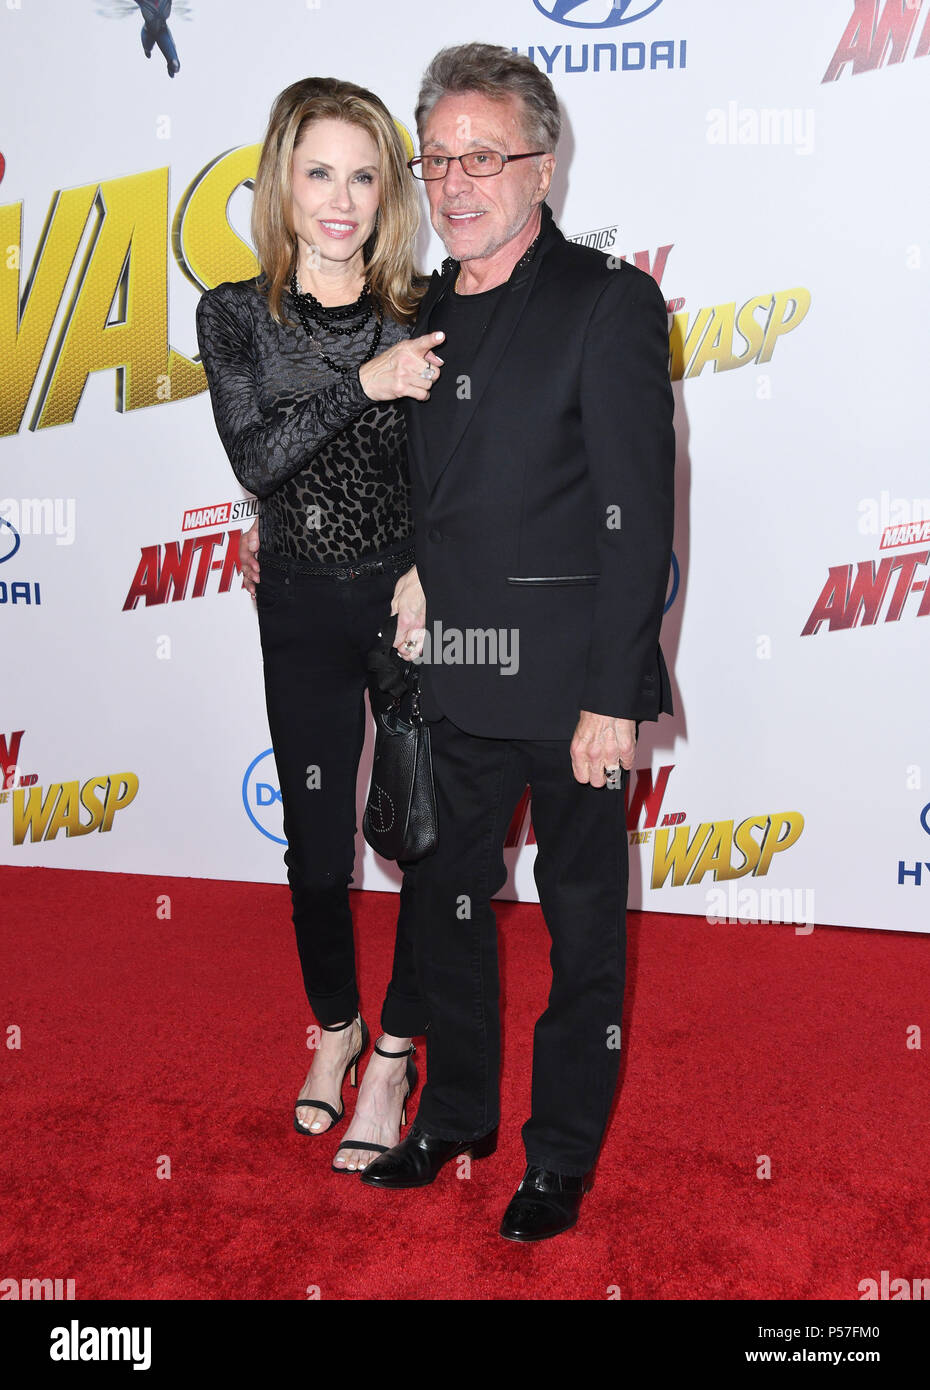 Hollywood, CA, USA. 25th June, 2018. 25 June 2018 - Hollywood, California - Frankie Valli. ''Ant-Man and The Wasp' Los Angeles Premiere held at theEl Capitan Theatre. Photo Credit: Birdie Thompson/AdMedia Credit: Birdie Thompson/AdMedia/ZUMA Wire/Alamy Live News Stock Photo